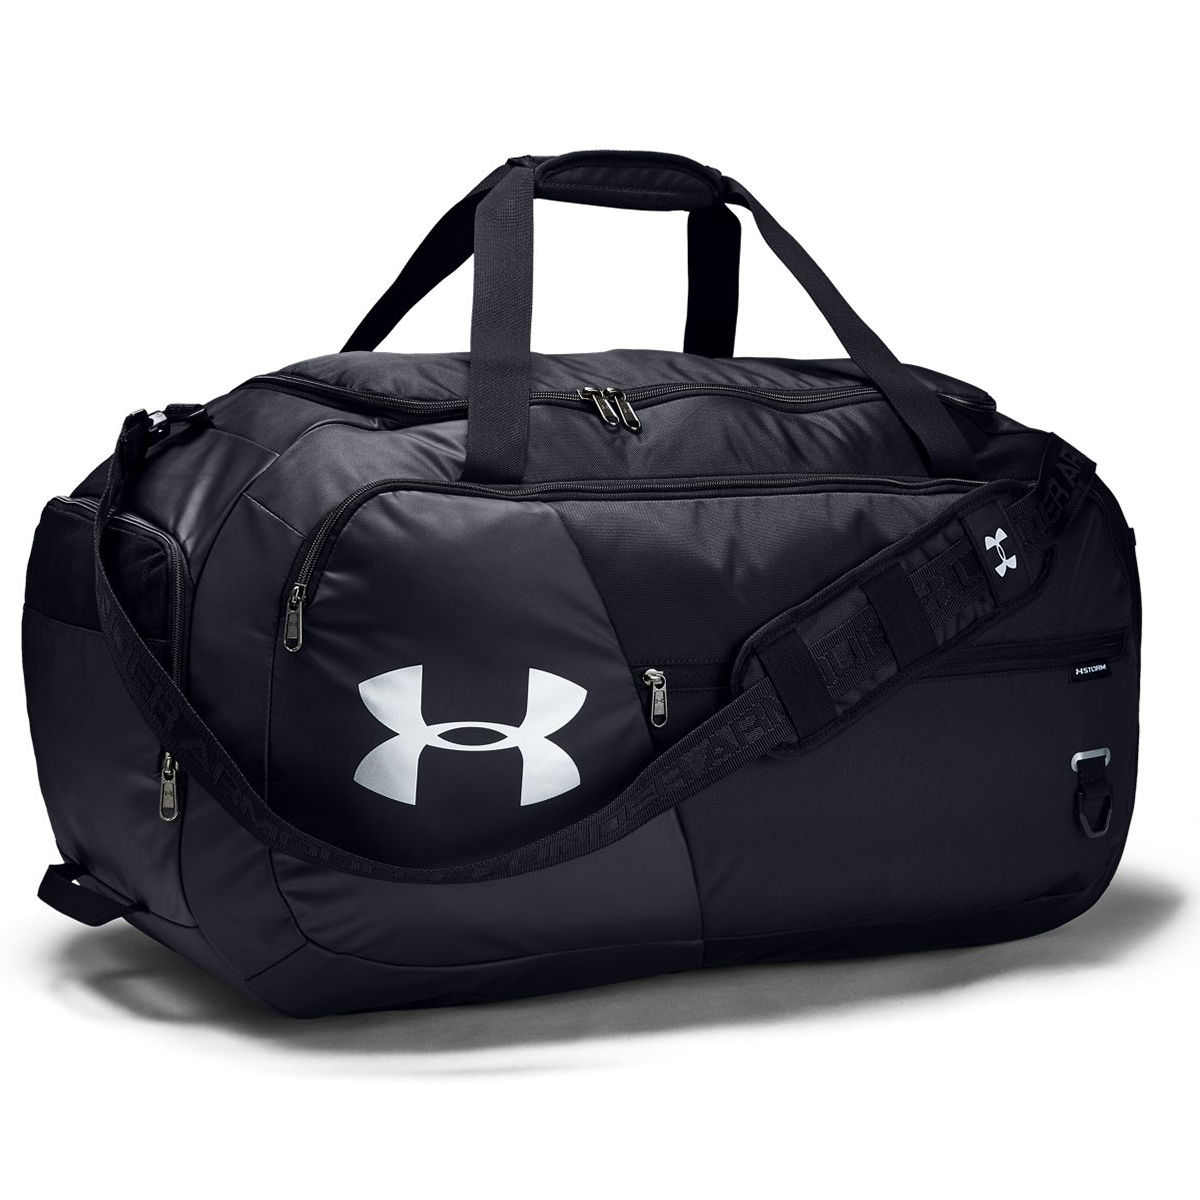 Under Armour Undeniable 4.0 Large Duffel Bag